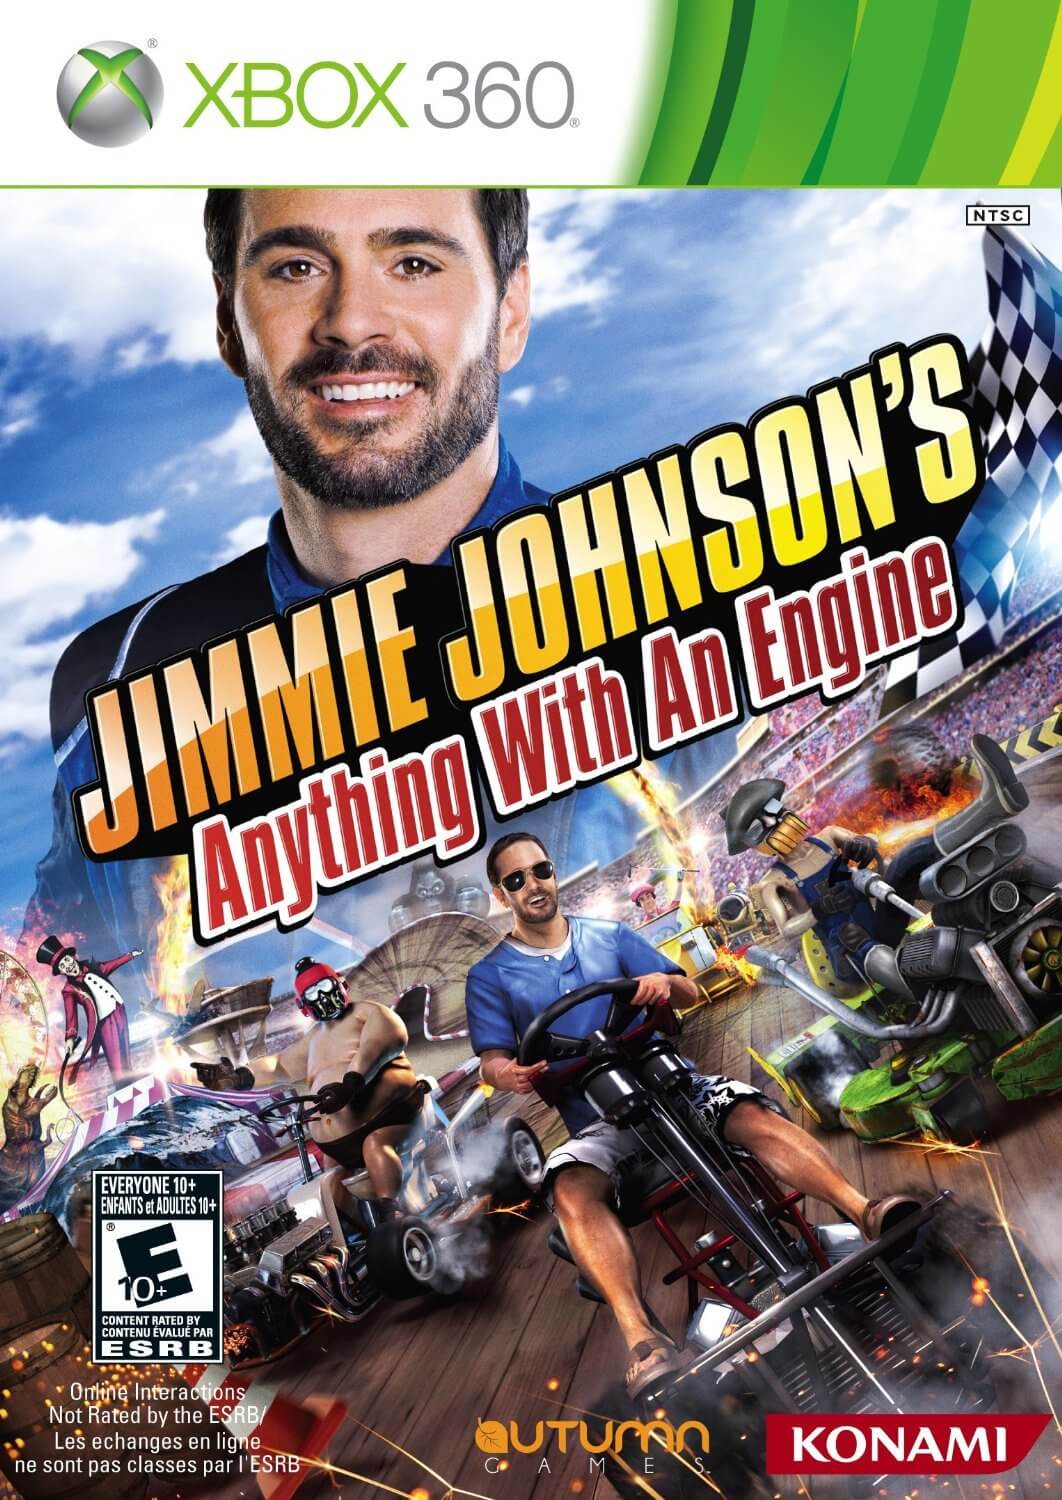 Jimmie Johnson’s Anything with an Engine